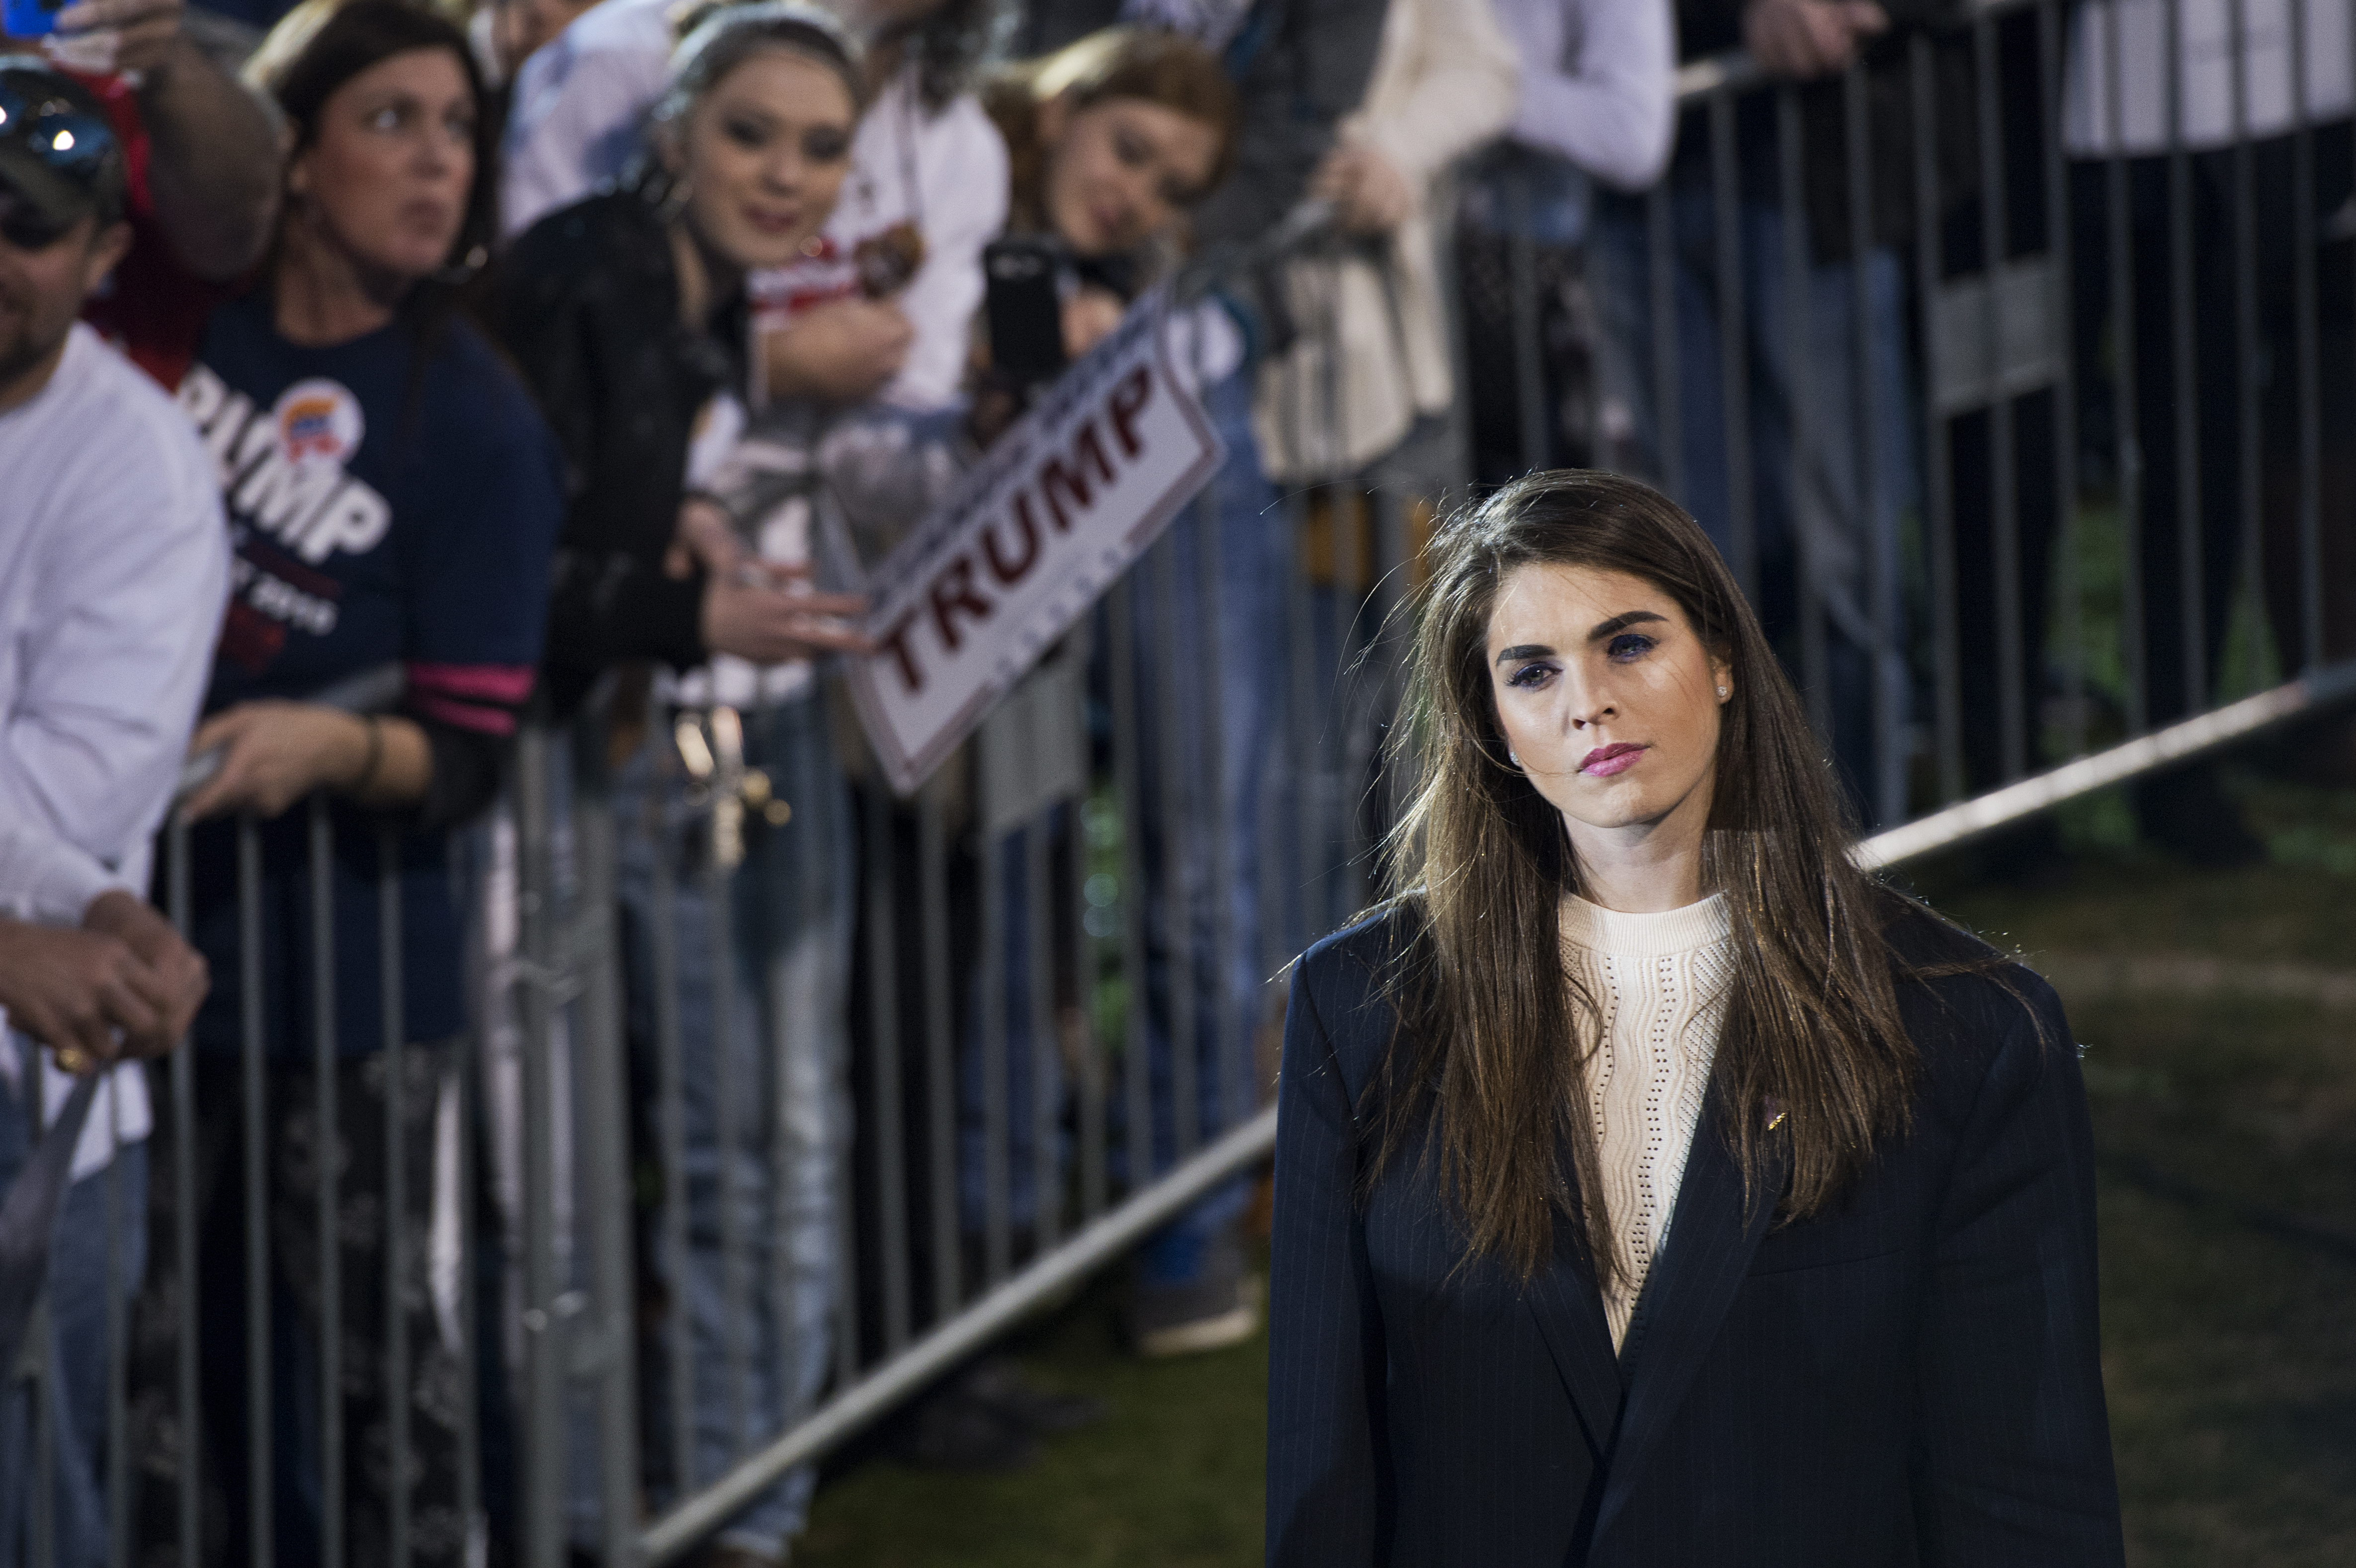 Hope Hicks, communications aide for Republican presidential candidate Donald Trump, attends a campaign rally at Madison City Schools Stadium in Madison, Ala., on Feb. 28, 2016 (Tom Williams—AP)